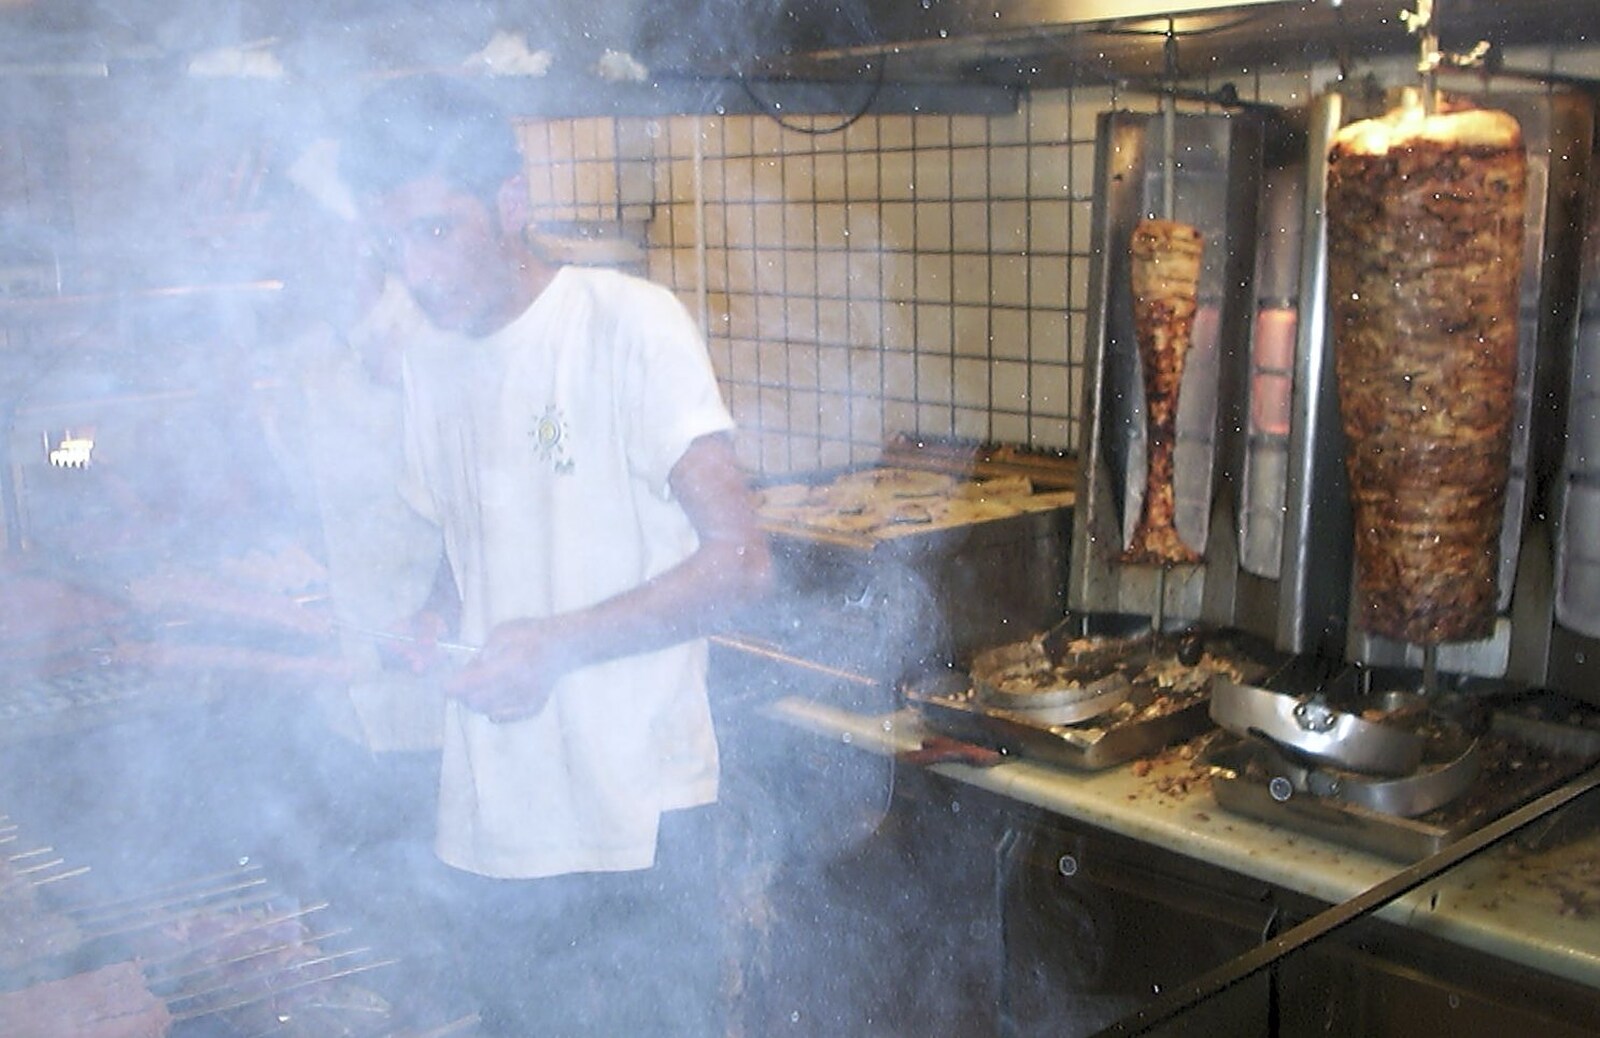 A Postcard From Athens: A Day Trip to the Olympics, Greece - 19th August 2004: The smoke is intense in the kebab shop